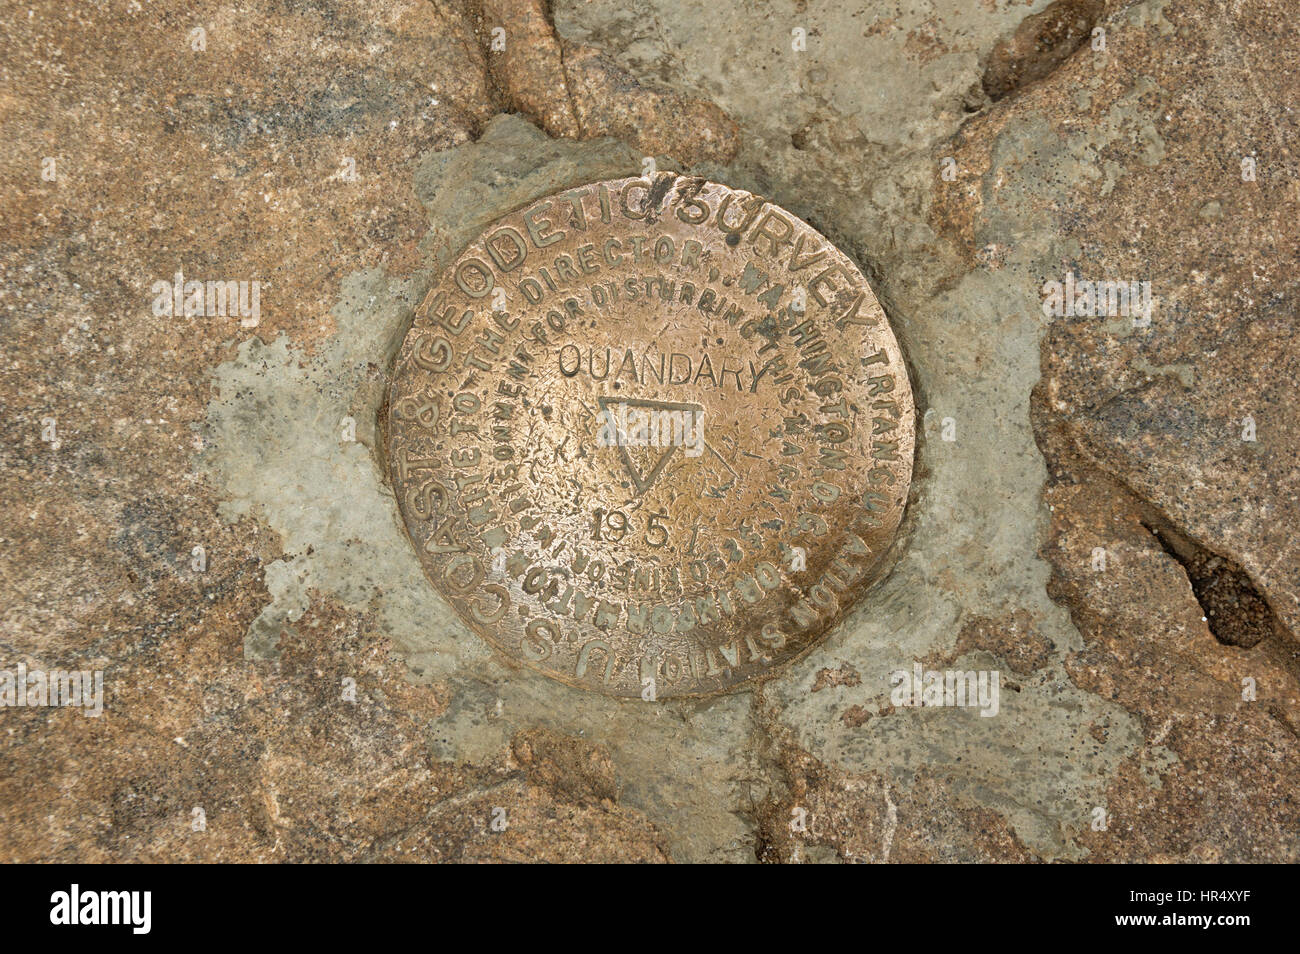 the bench mark on the summit of Quandary Peak, a popular fourteener mountain in Colorado Stock Photo